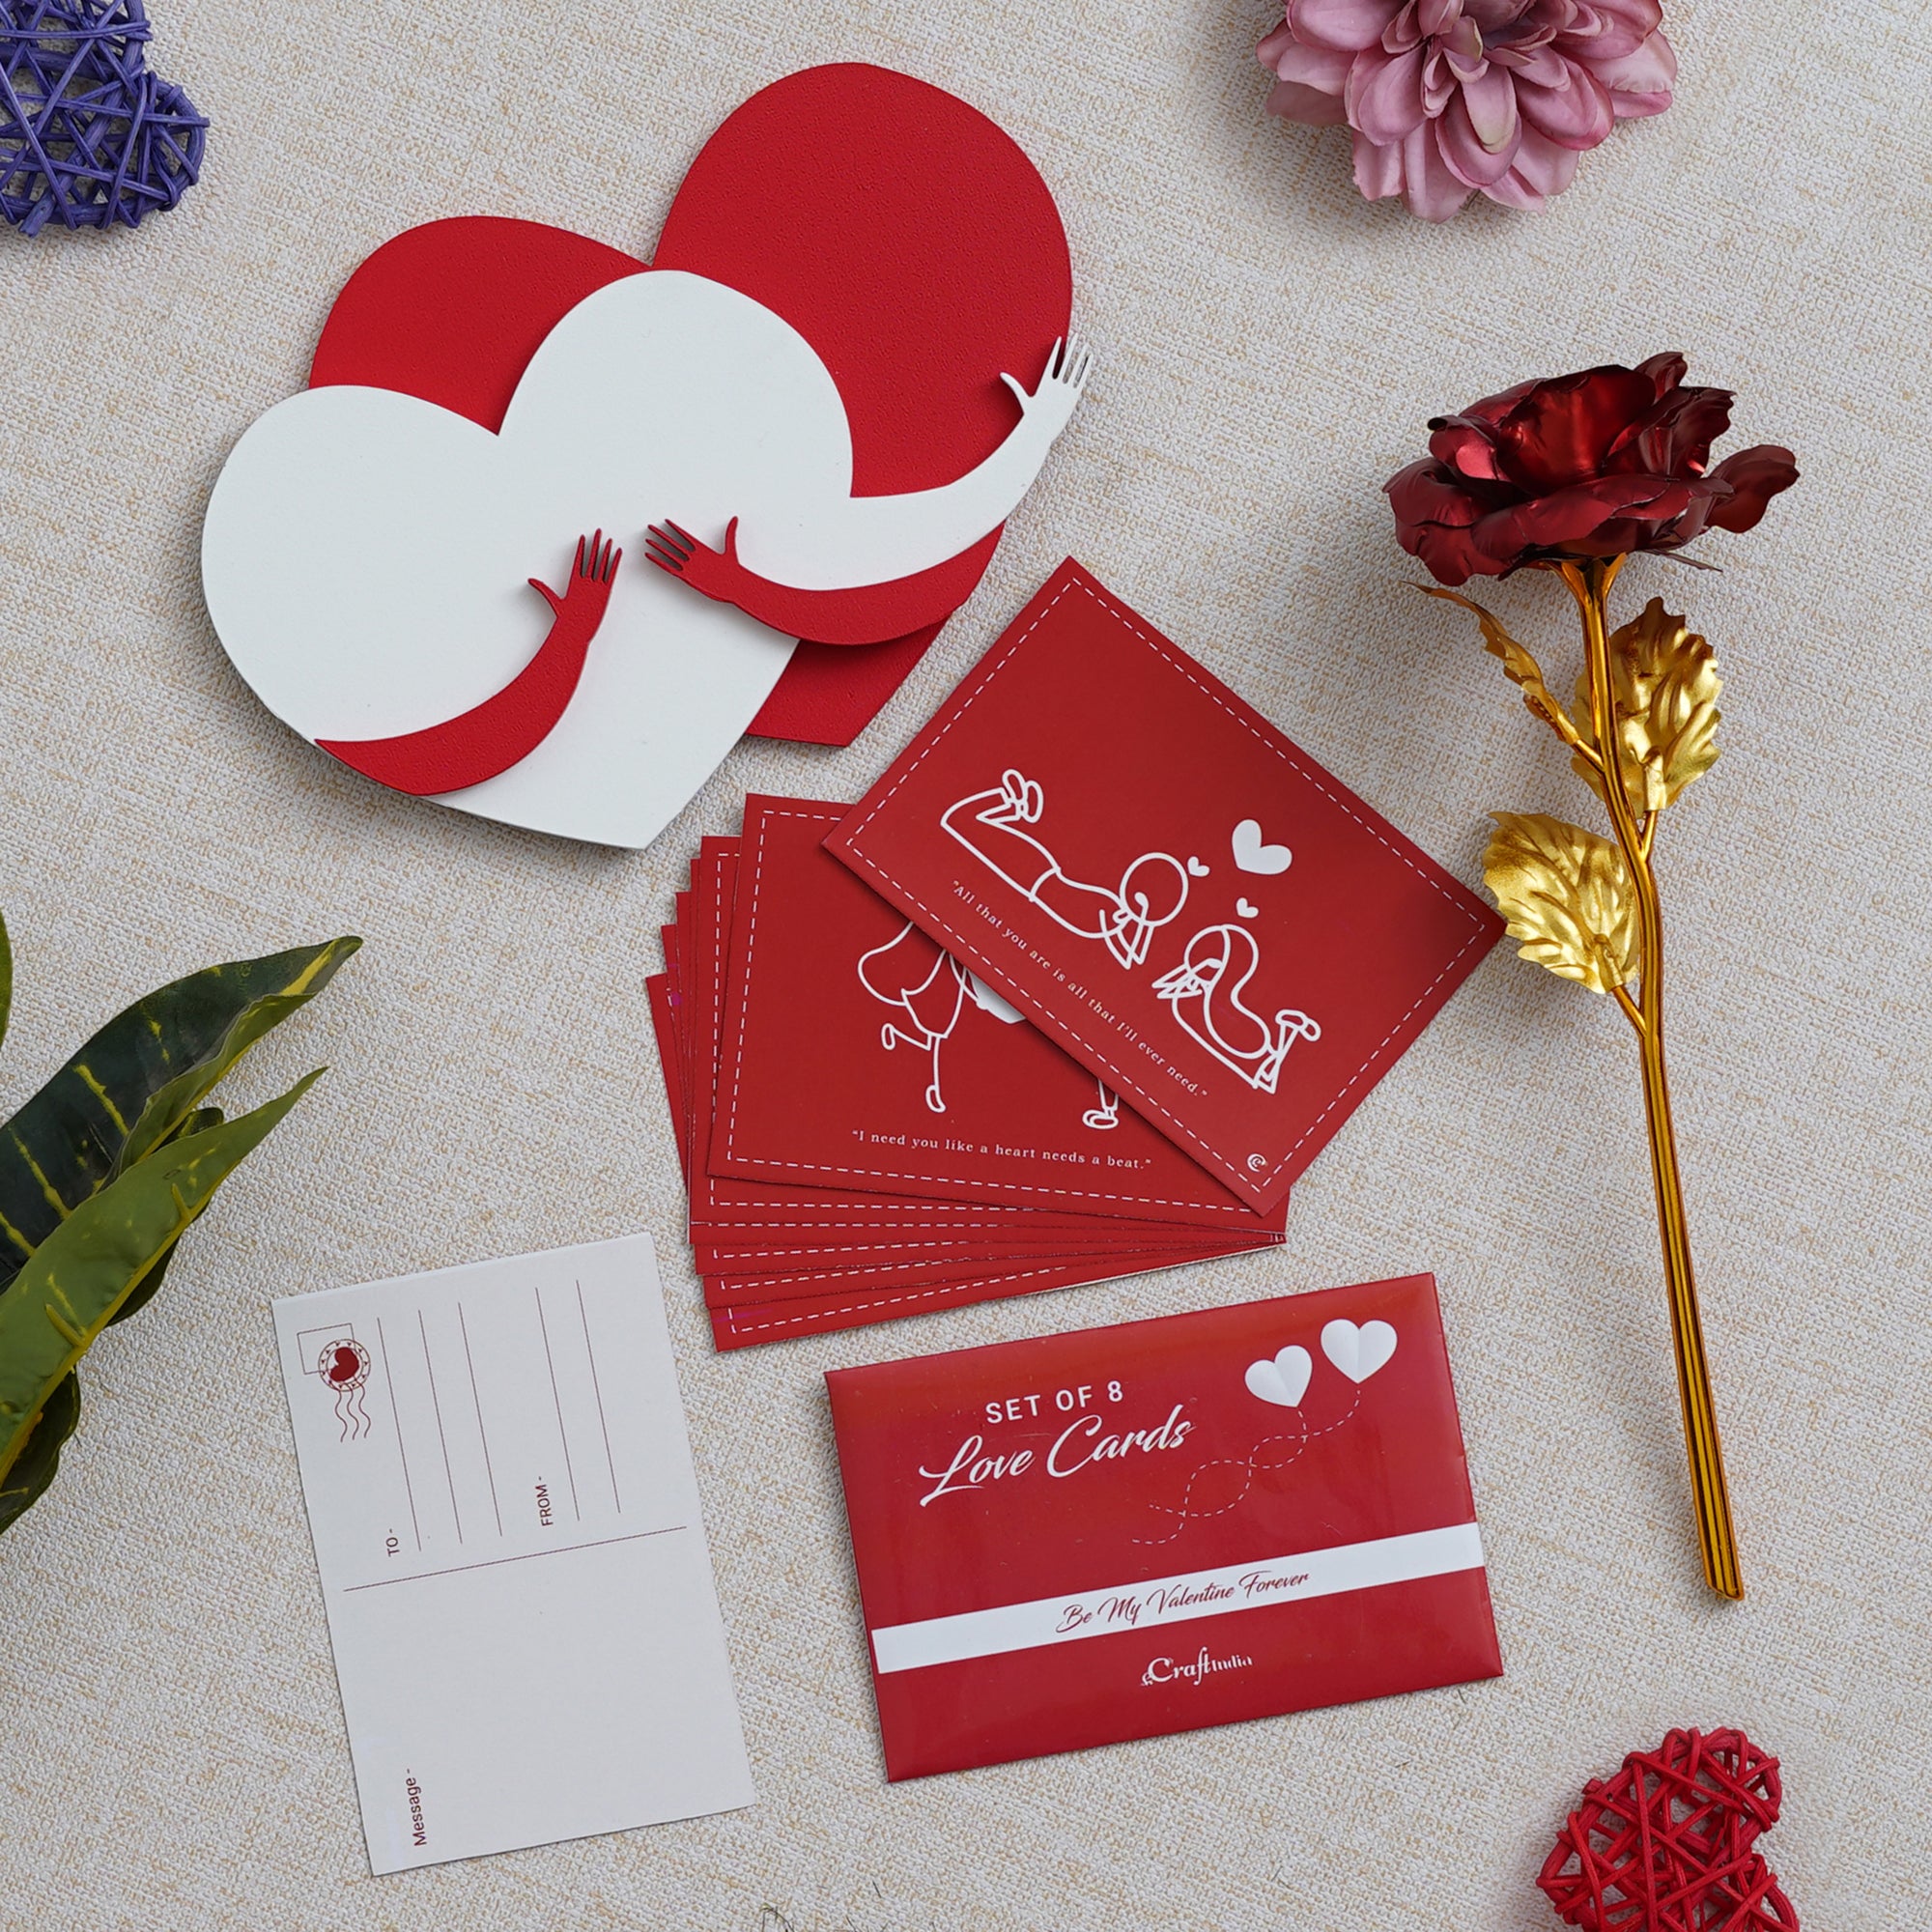 Valentine Combo of Set of 8 Love Post Cards Gift Cards Set, Golden Red Rose Gift Set, Heart Shaped Gift Box Set with White Teddy and Red Roses